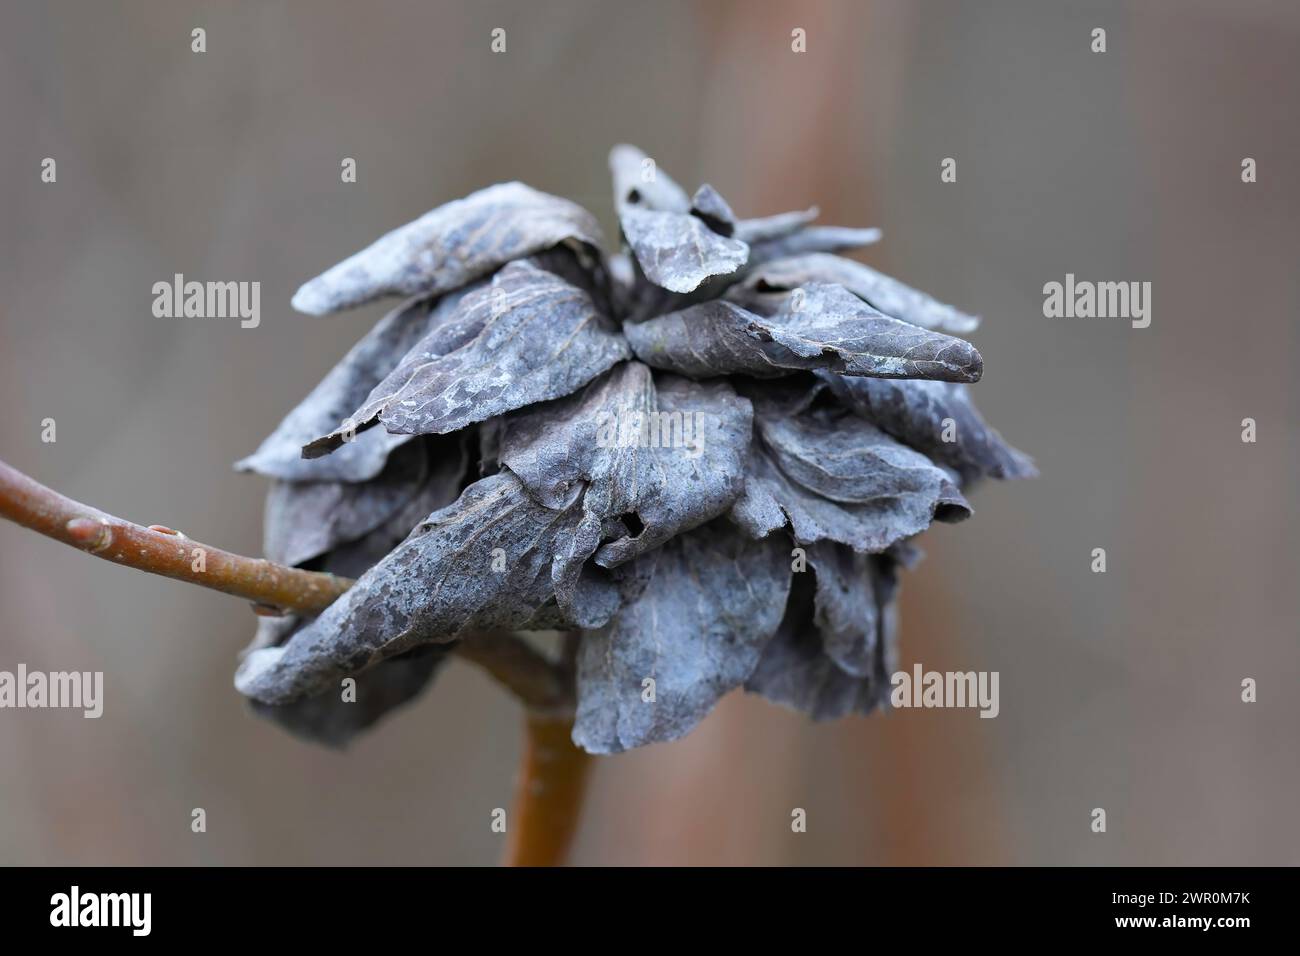 Natural closeup on a typical dried Camellia gall induction of Rabdophaga rosaria gall midge on Salix, Willow Stock Photo